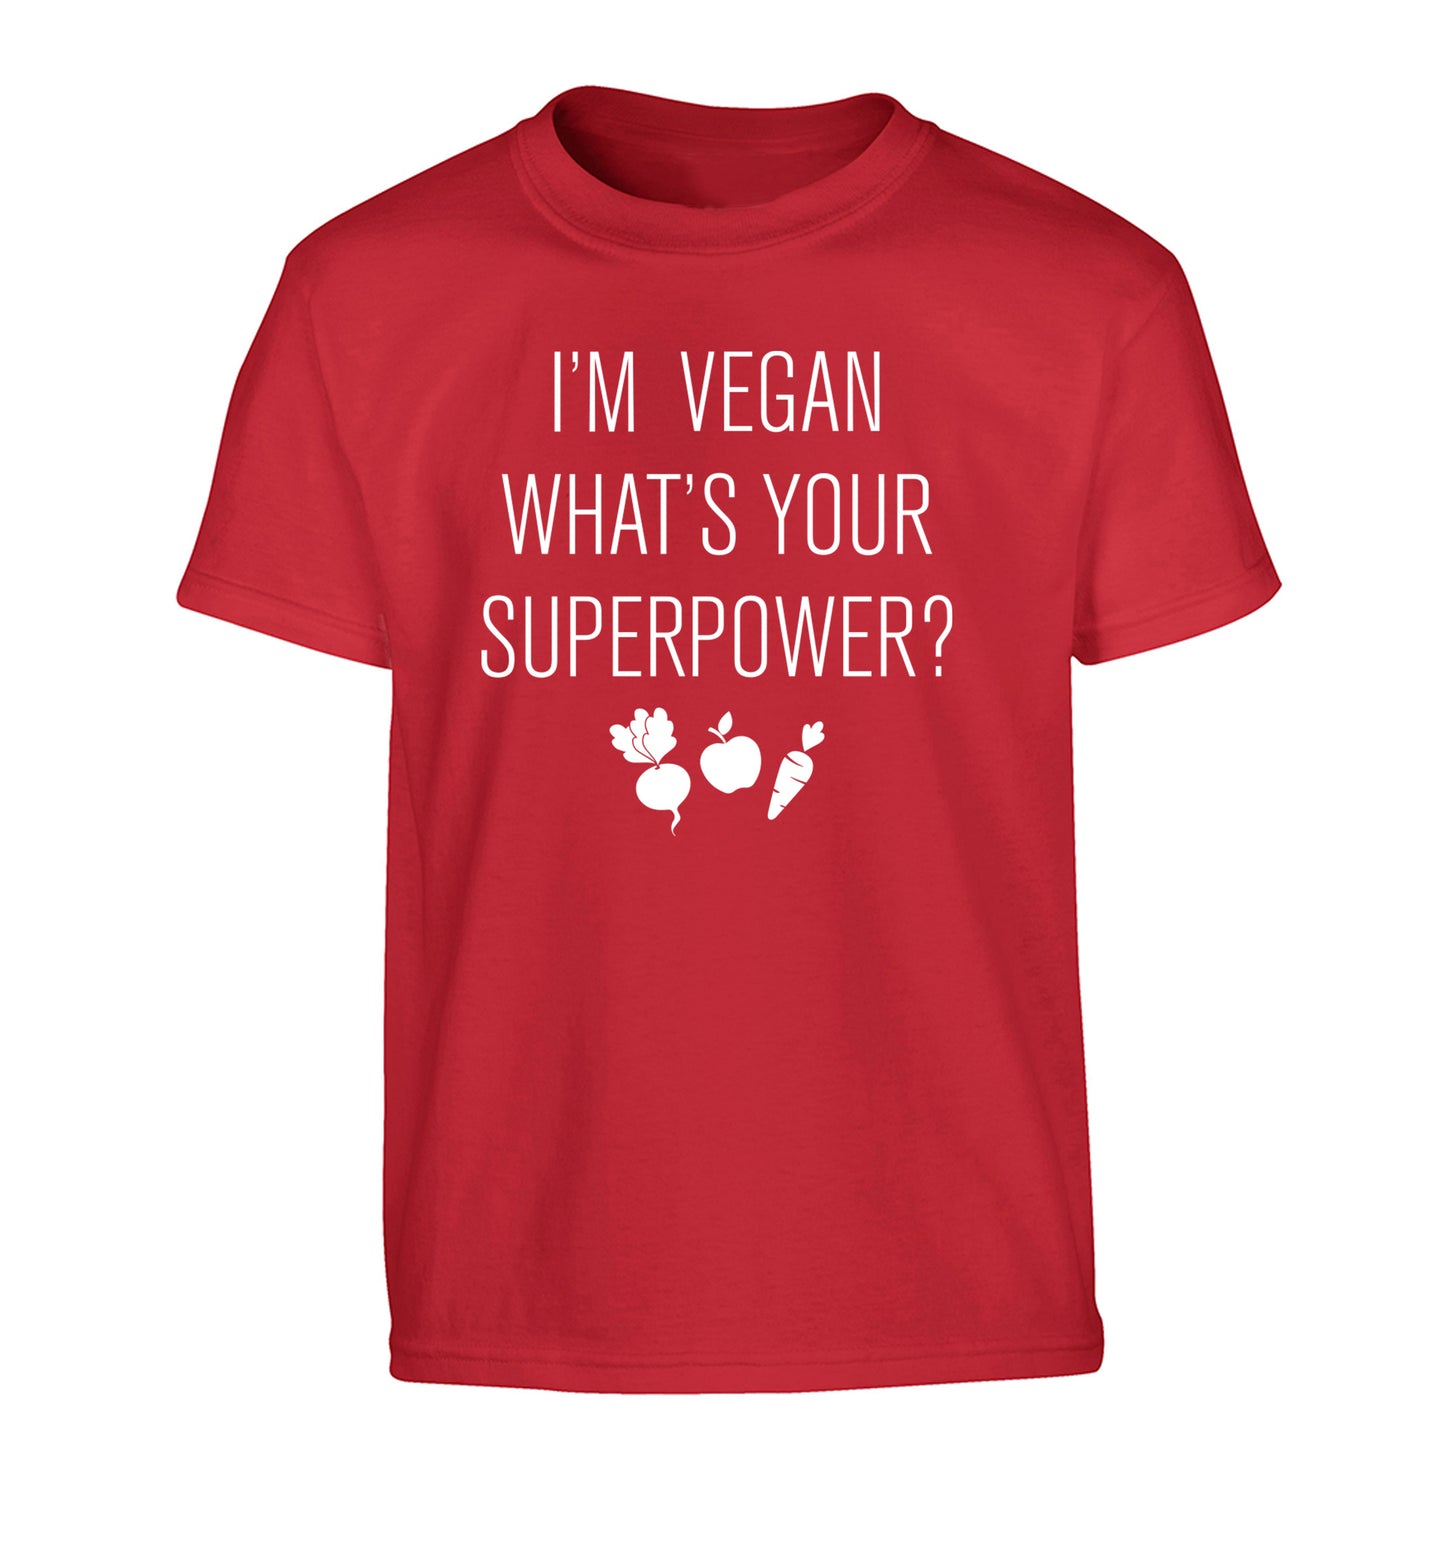 I'm Vegan What's Your Superpower? Children's red Tshirt 12-13 Years